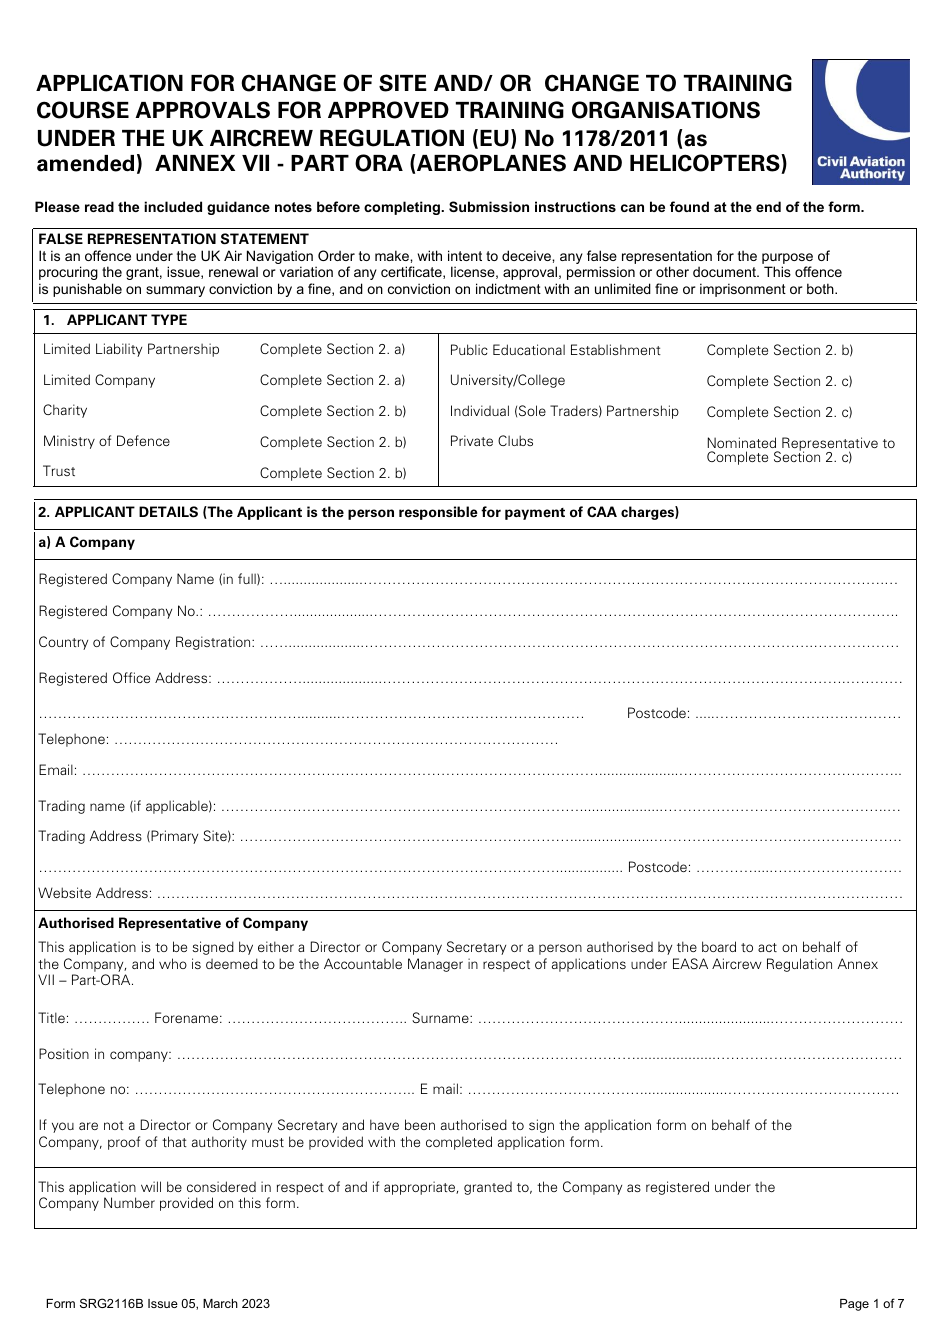 Form SRG2116B Application for Change of Site and / or Change to Training Course Approvals for Approved Training Organisations Under the UK Aircrew Regulation (Eu) No 1178 / 2011 (As Amended) - Annex VII - Part Ora (Aeroplanes and Helicopters) - United Kingdom, Page 1